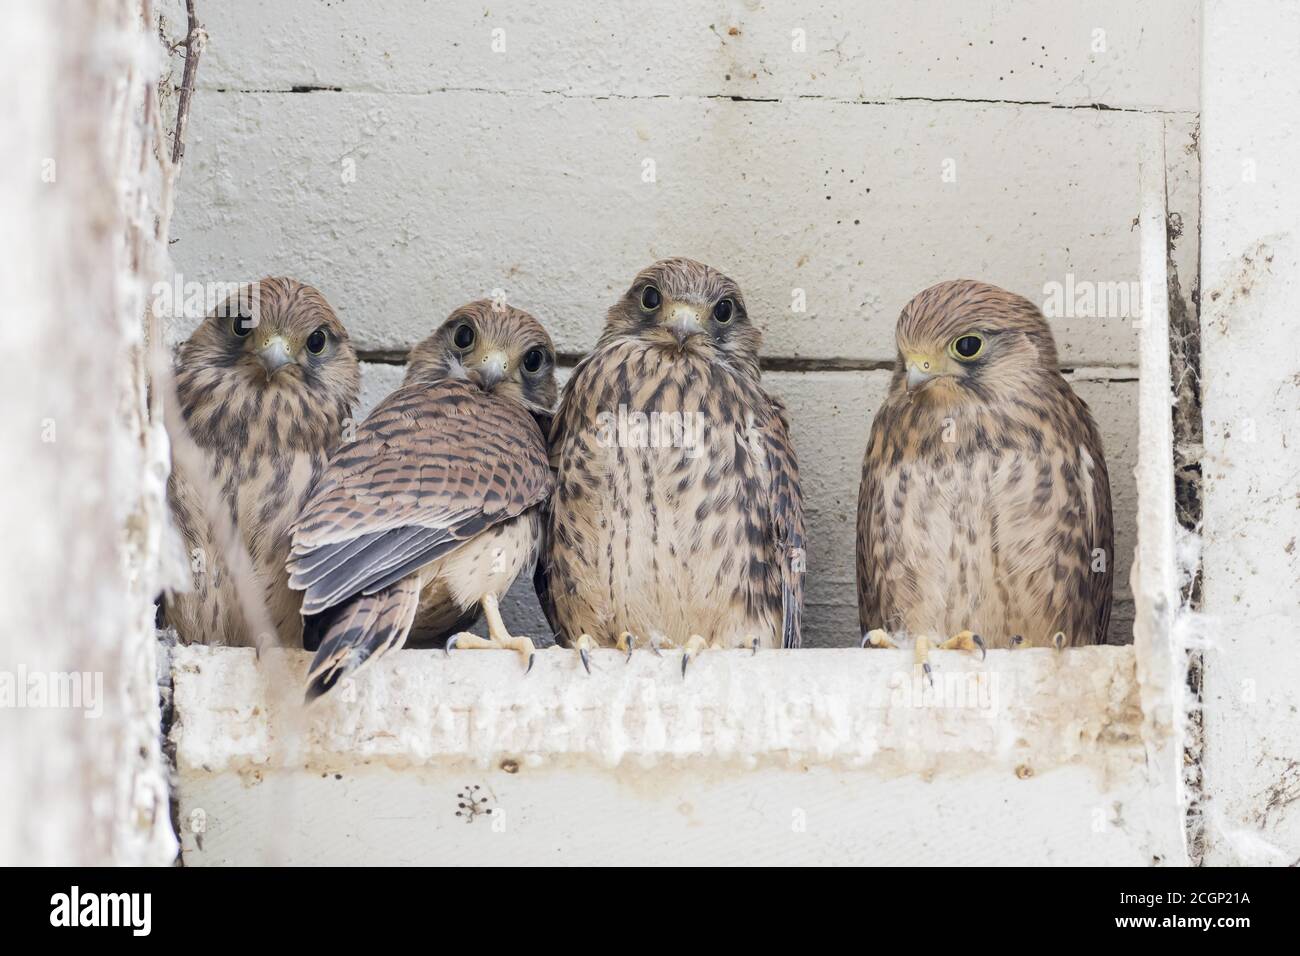 Four Common kestrels (Falco tinnunculus), young birds, sitting in the nesting box, Hesse, Germany Stock Photo